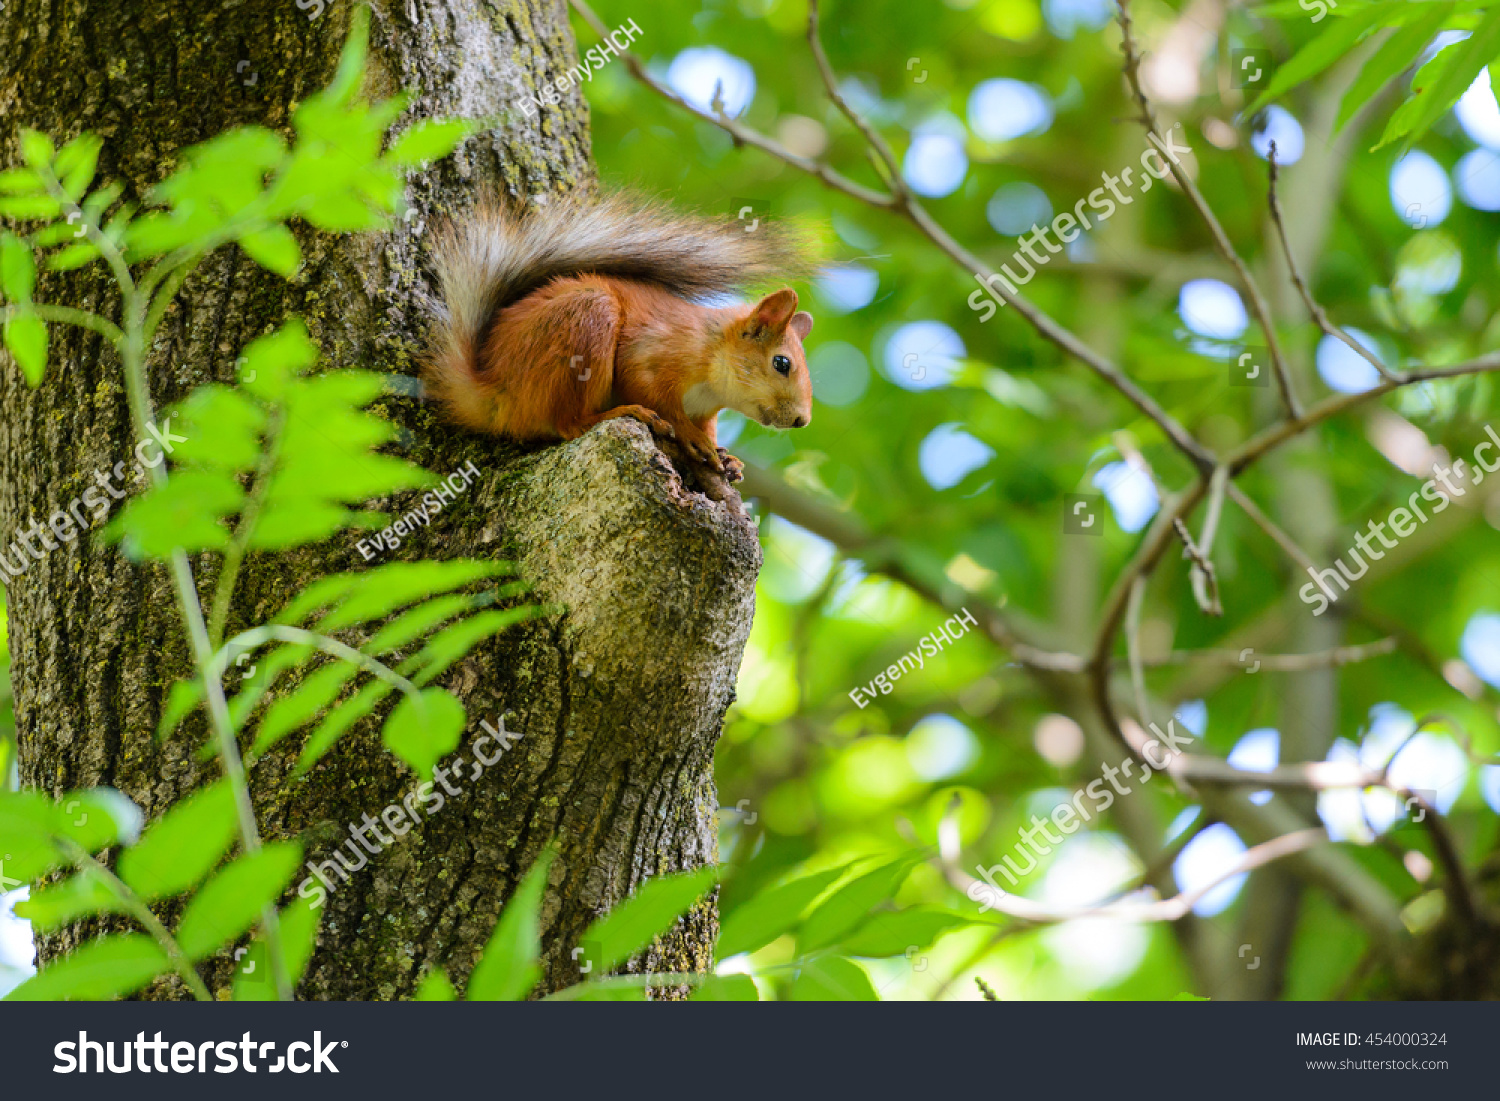 Animals in wildlife. Amazing picture of beautiful sunny squirrel sitting on a high tree with green leaves in deep forest.  #454000324